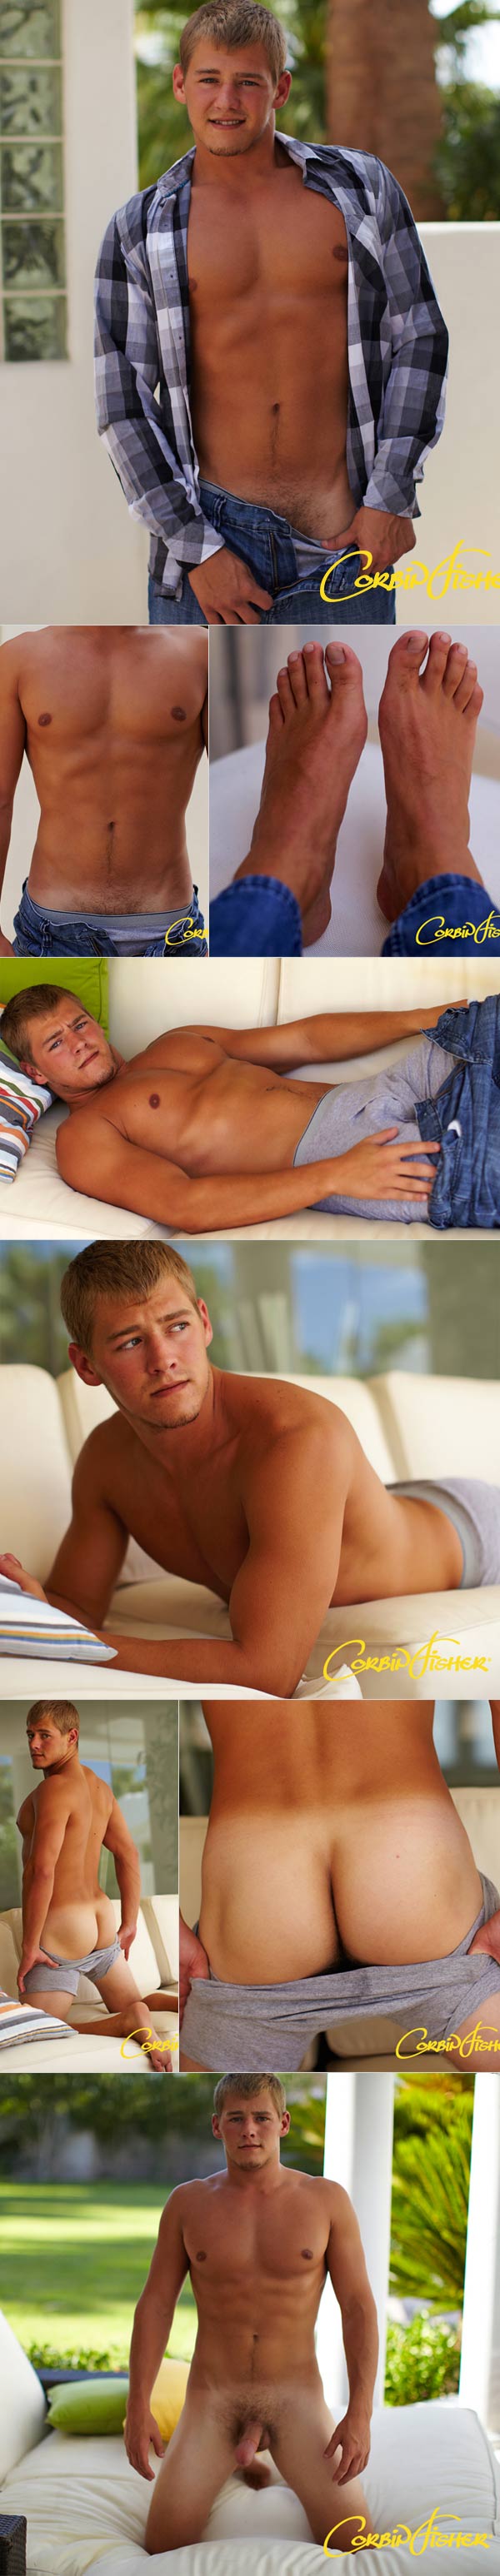 Forrest at CorbinFisher